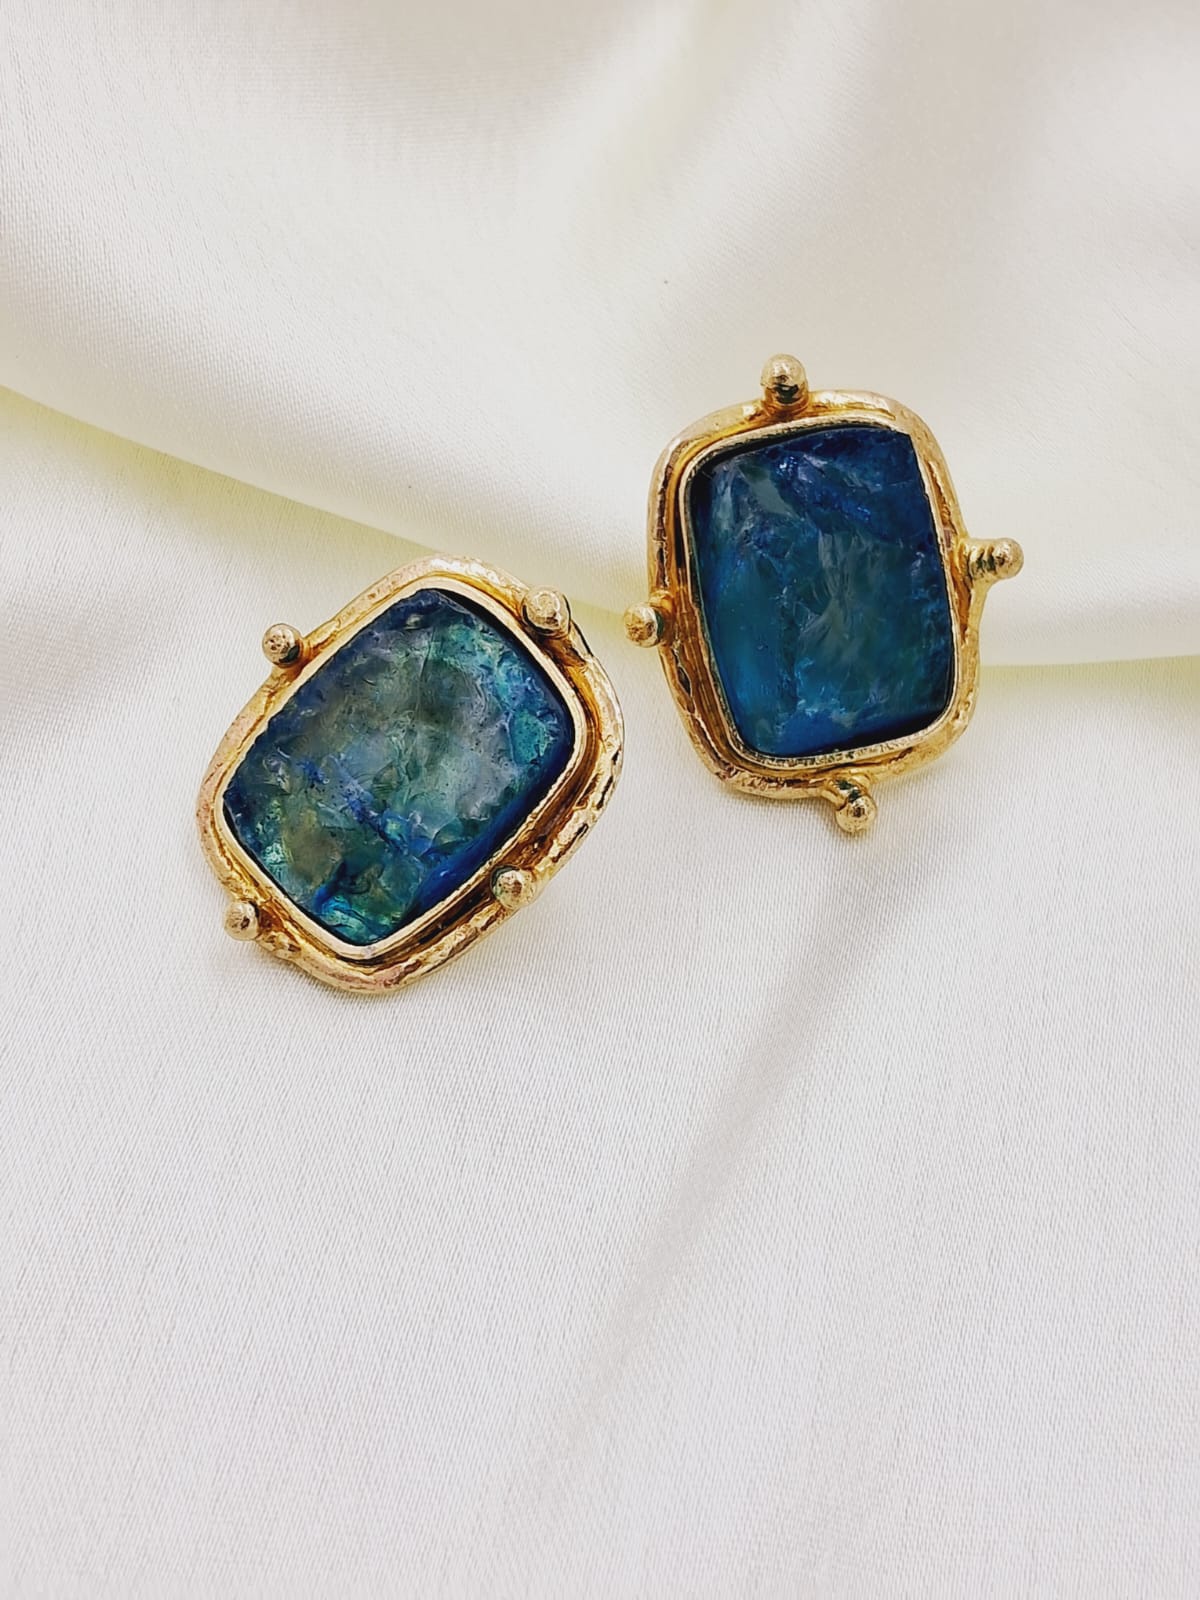 This stud is made from Rough blue  Crystal semi precious stone stud surrounded by gold plating giving a square look alike shape.